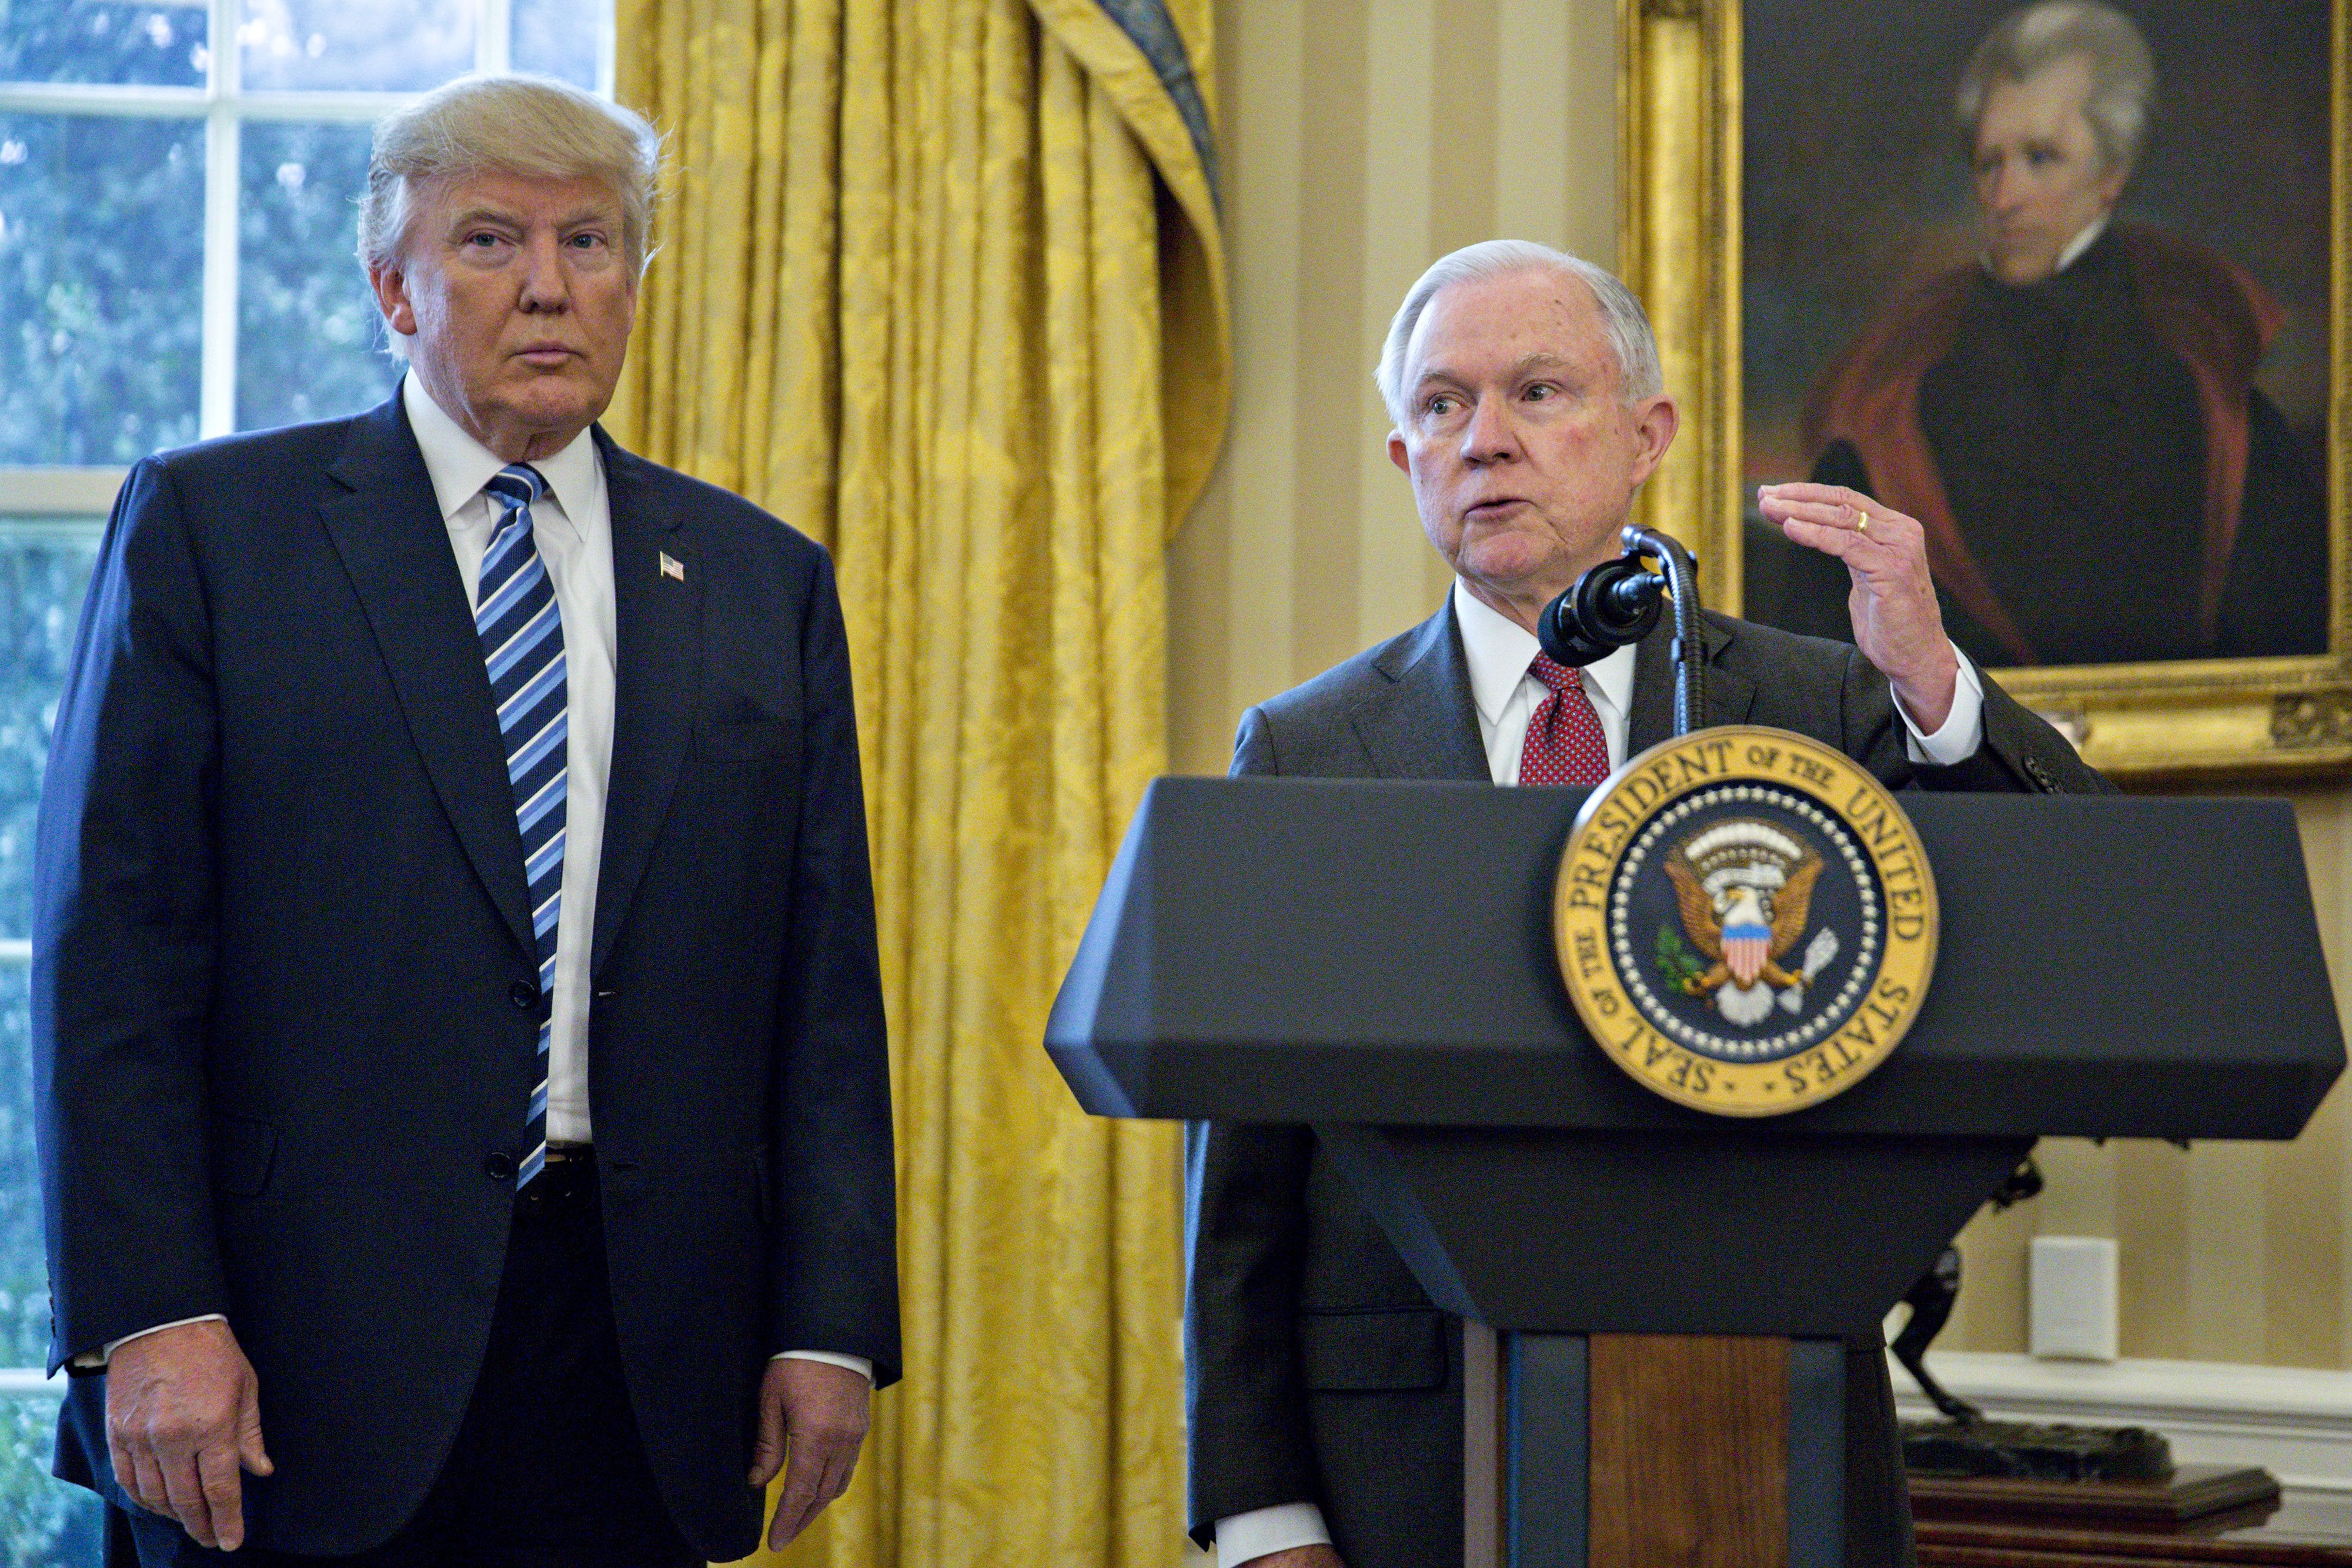 Jeff Sessions Spoke With Russian Ambassador Twice During Trump’s Campaign